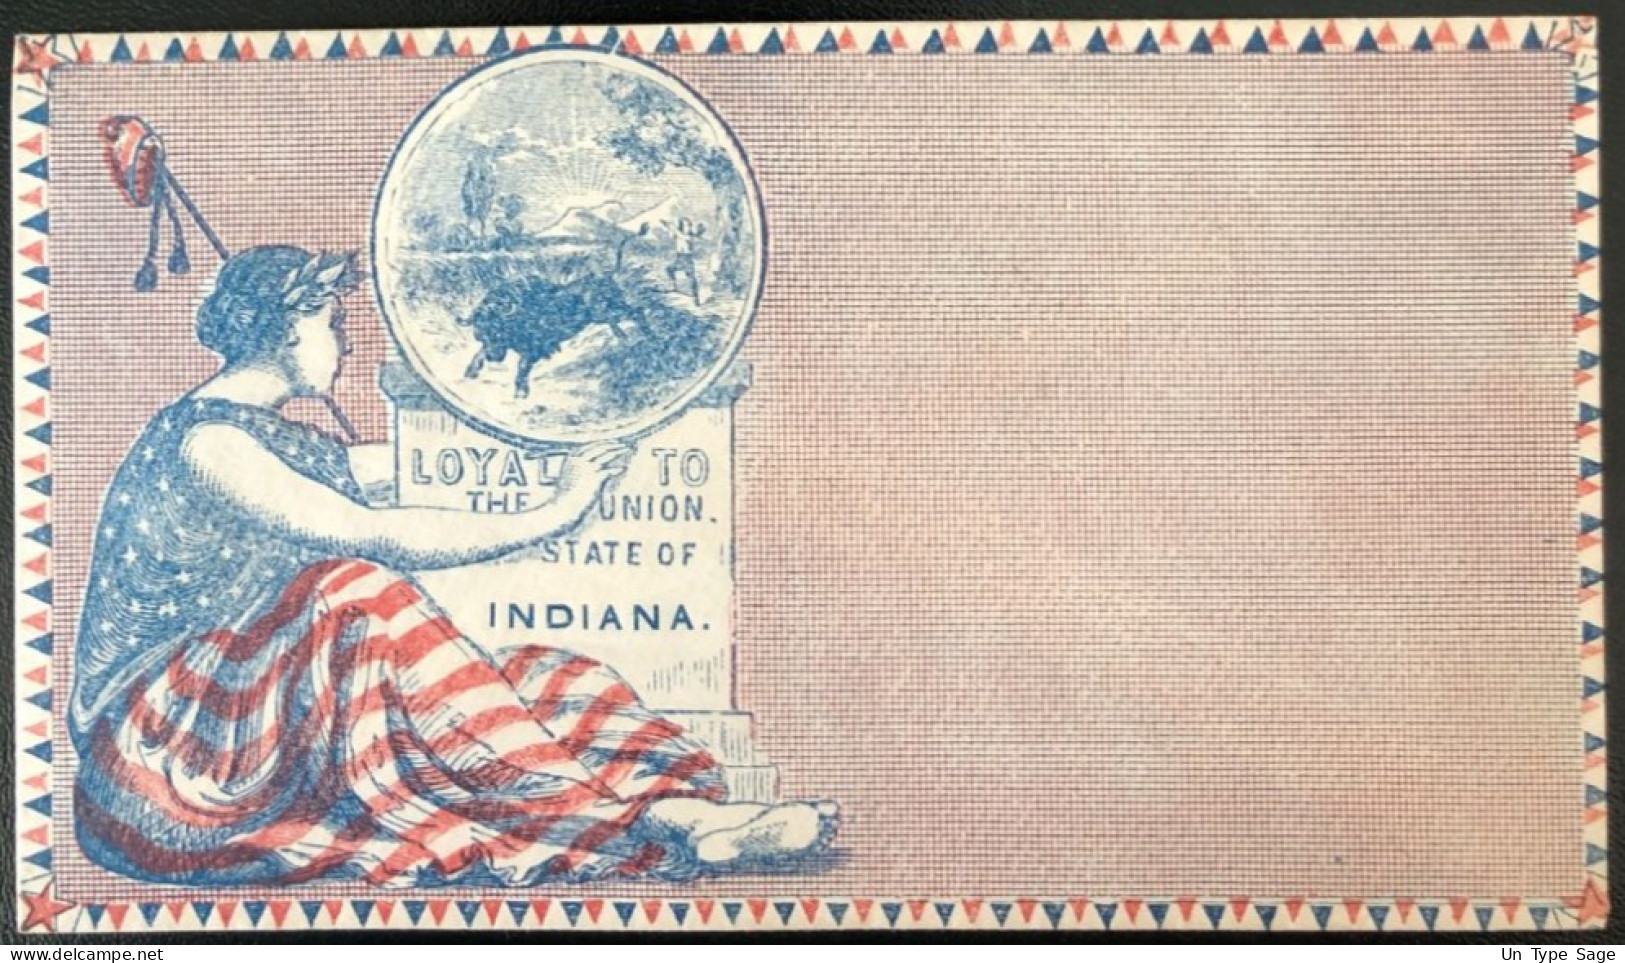 U.S.A, Civil War, Patriotic Cover - "Loyal To The Union. State Of INDIANA" - Unused - (C457) - Marcofilie